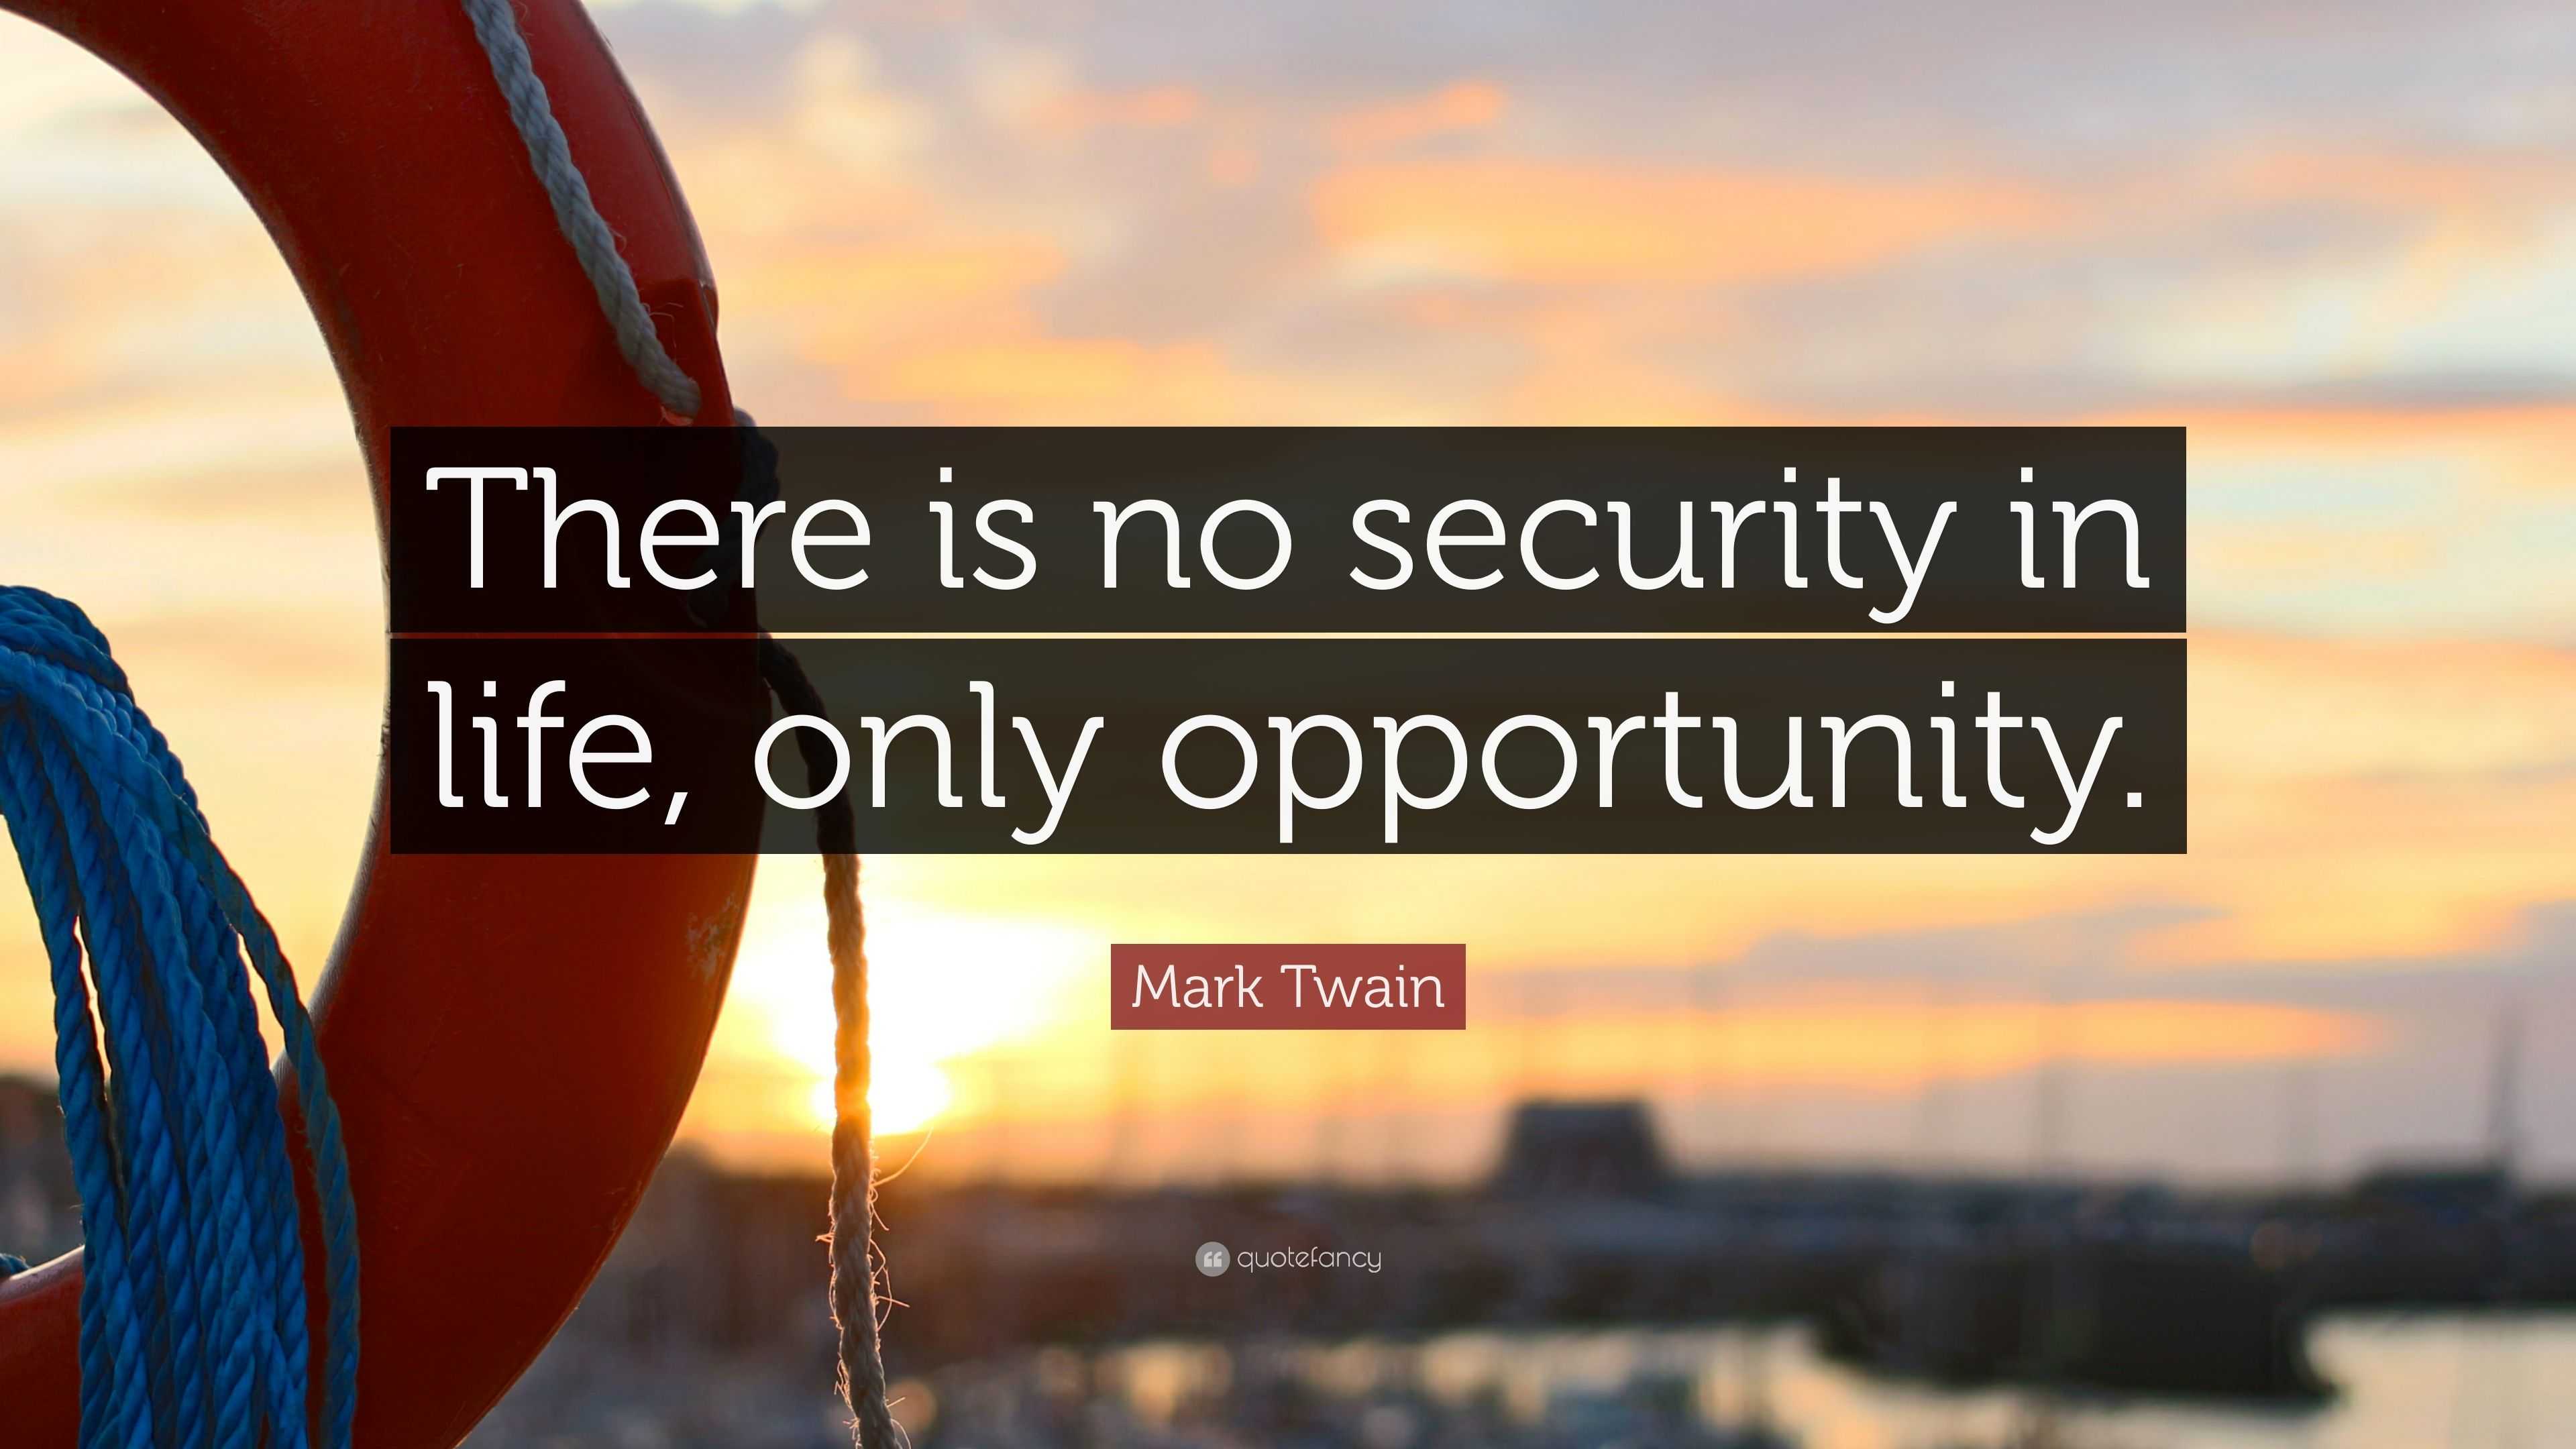 Mark Twain Quote “There is no security in life only opportunity ”